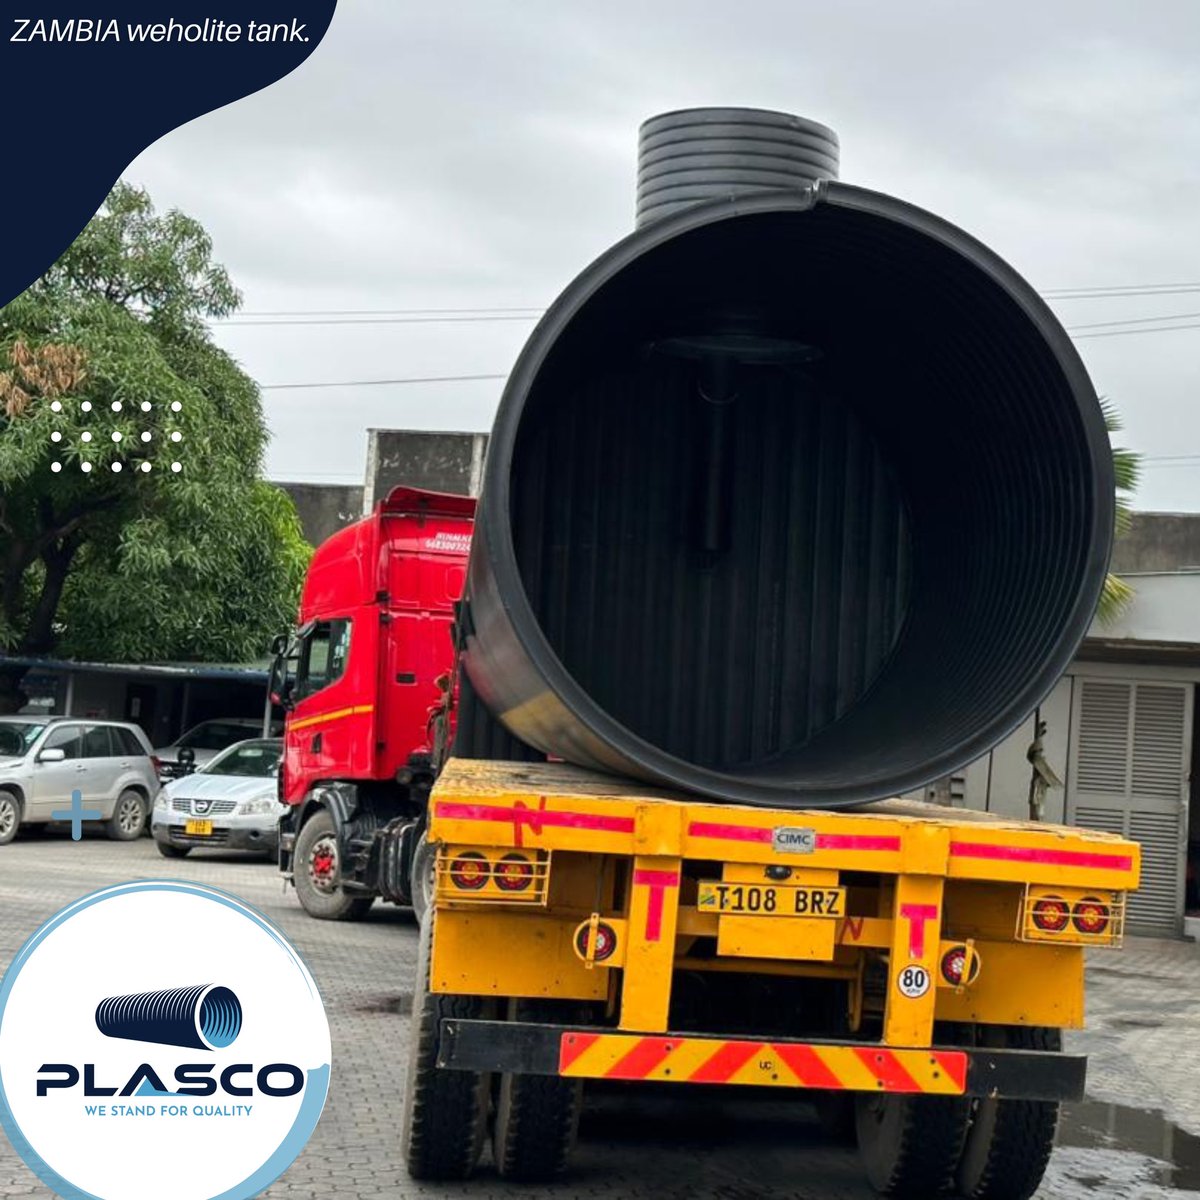 Embarking on a mission to Zambia! Our 150m3 Weholite septic tank is on its way, bringing advanced sanitation solutions to uplift communities. Together, let's build a healthier future. #Weholite #SanitationSolutions #CommunityEmpowerment